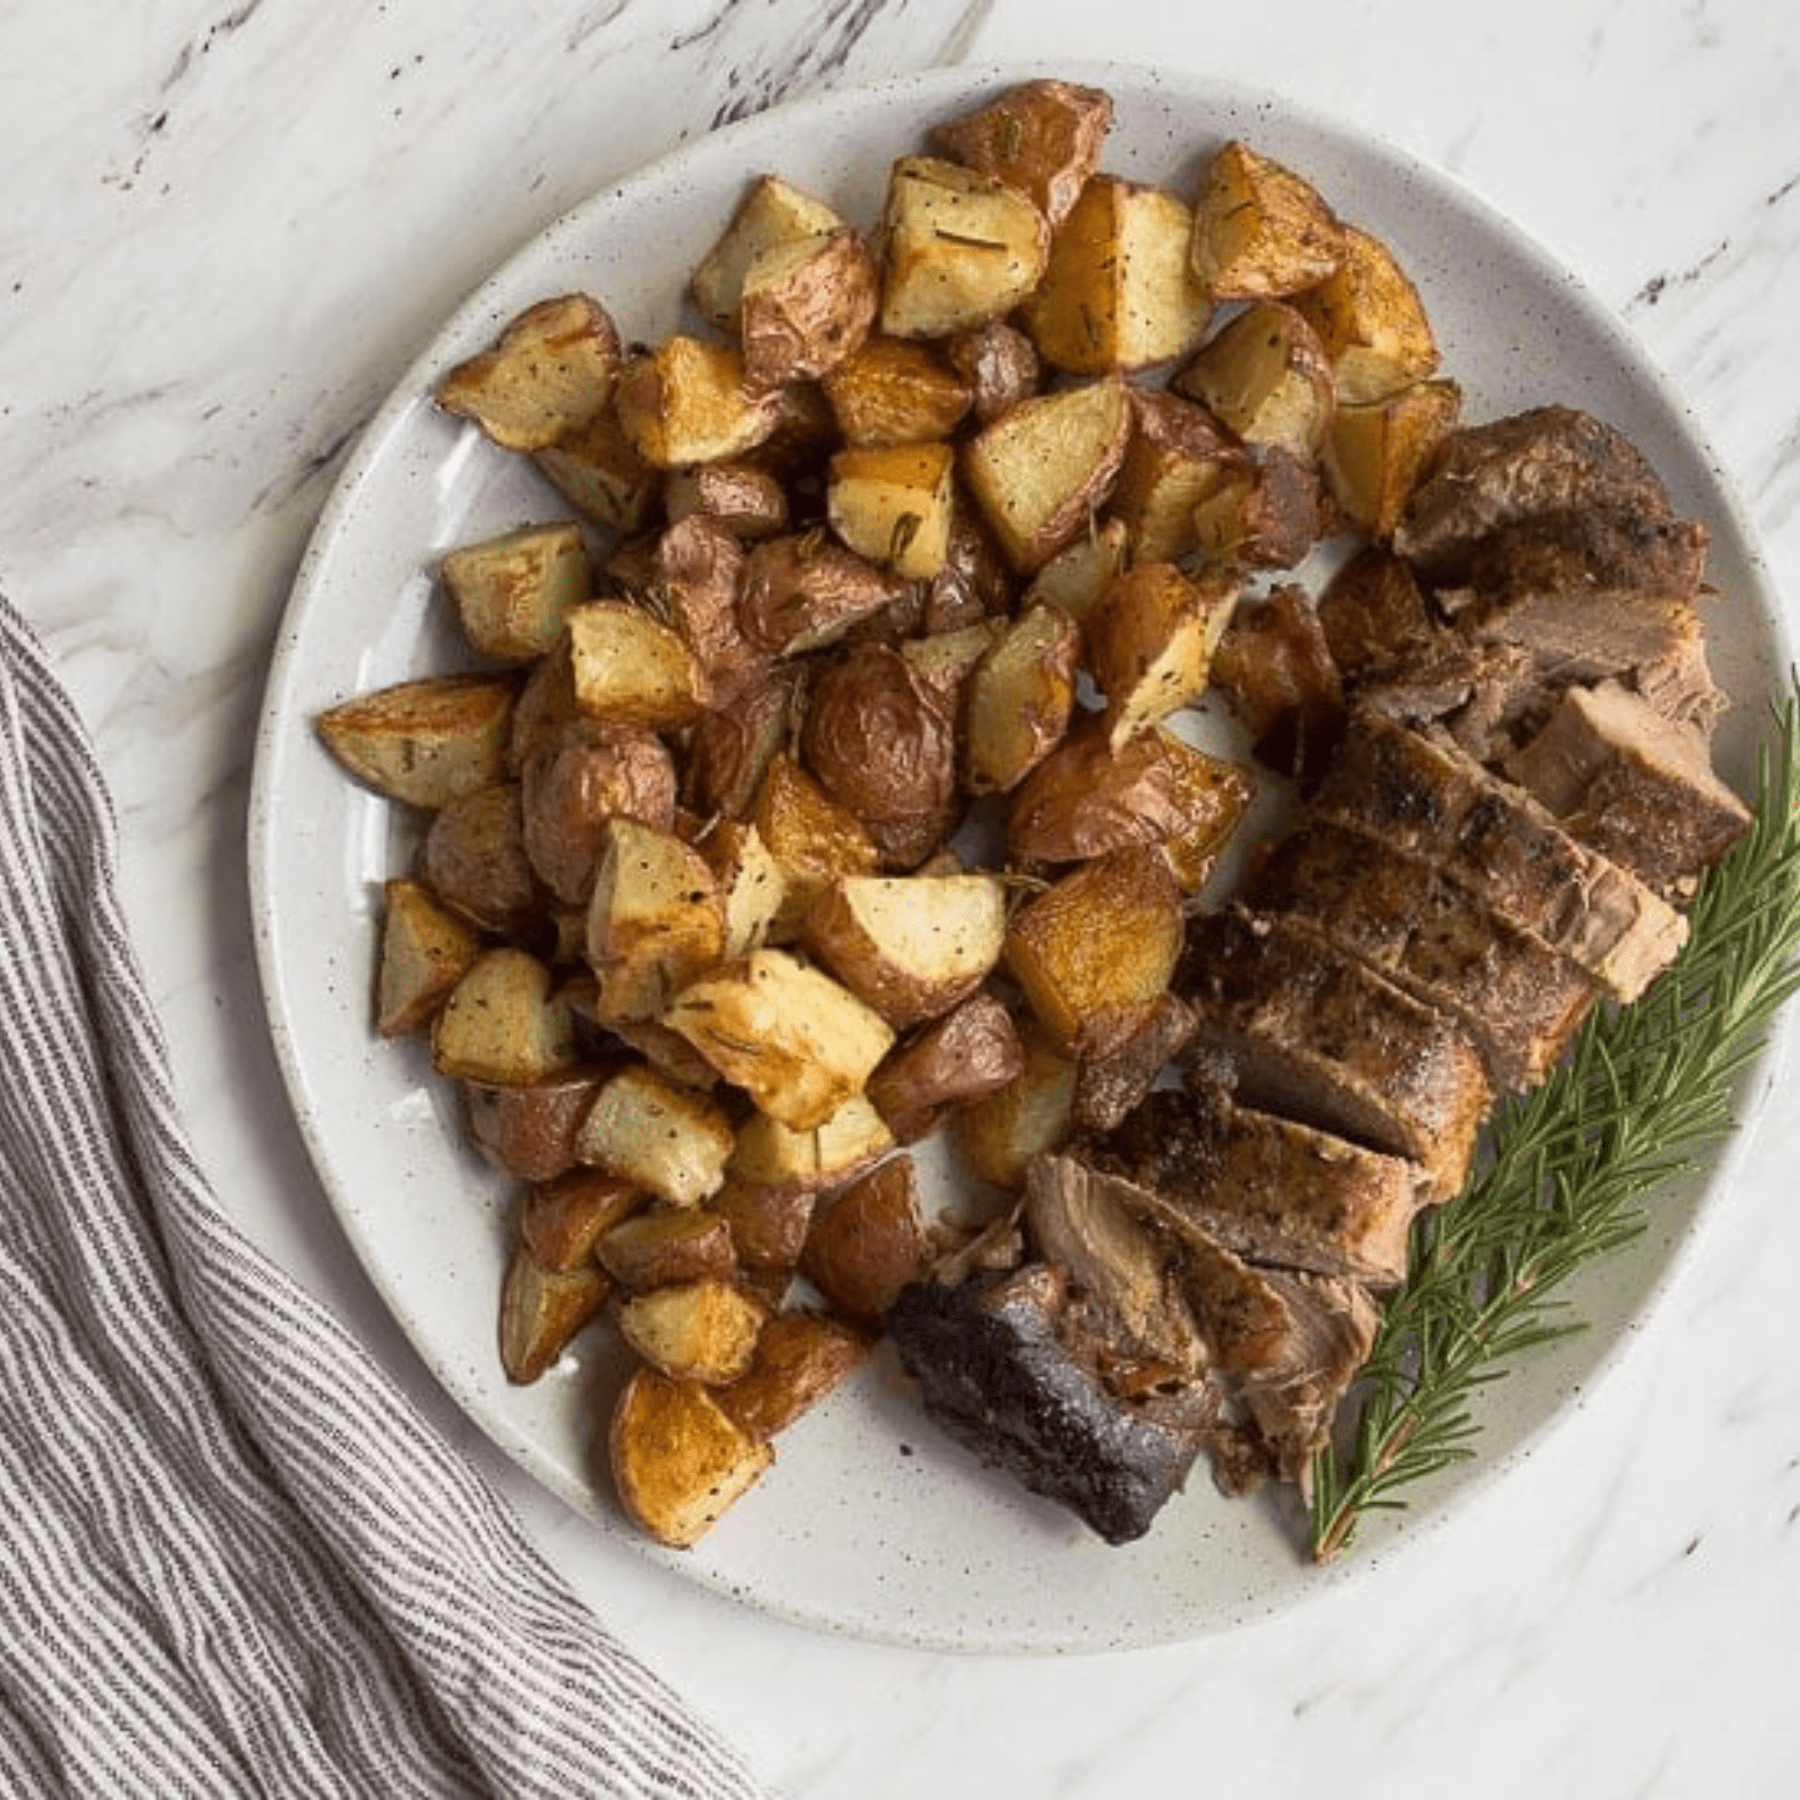 Pork loin with roasted potatoes on a white plate.